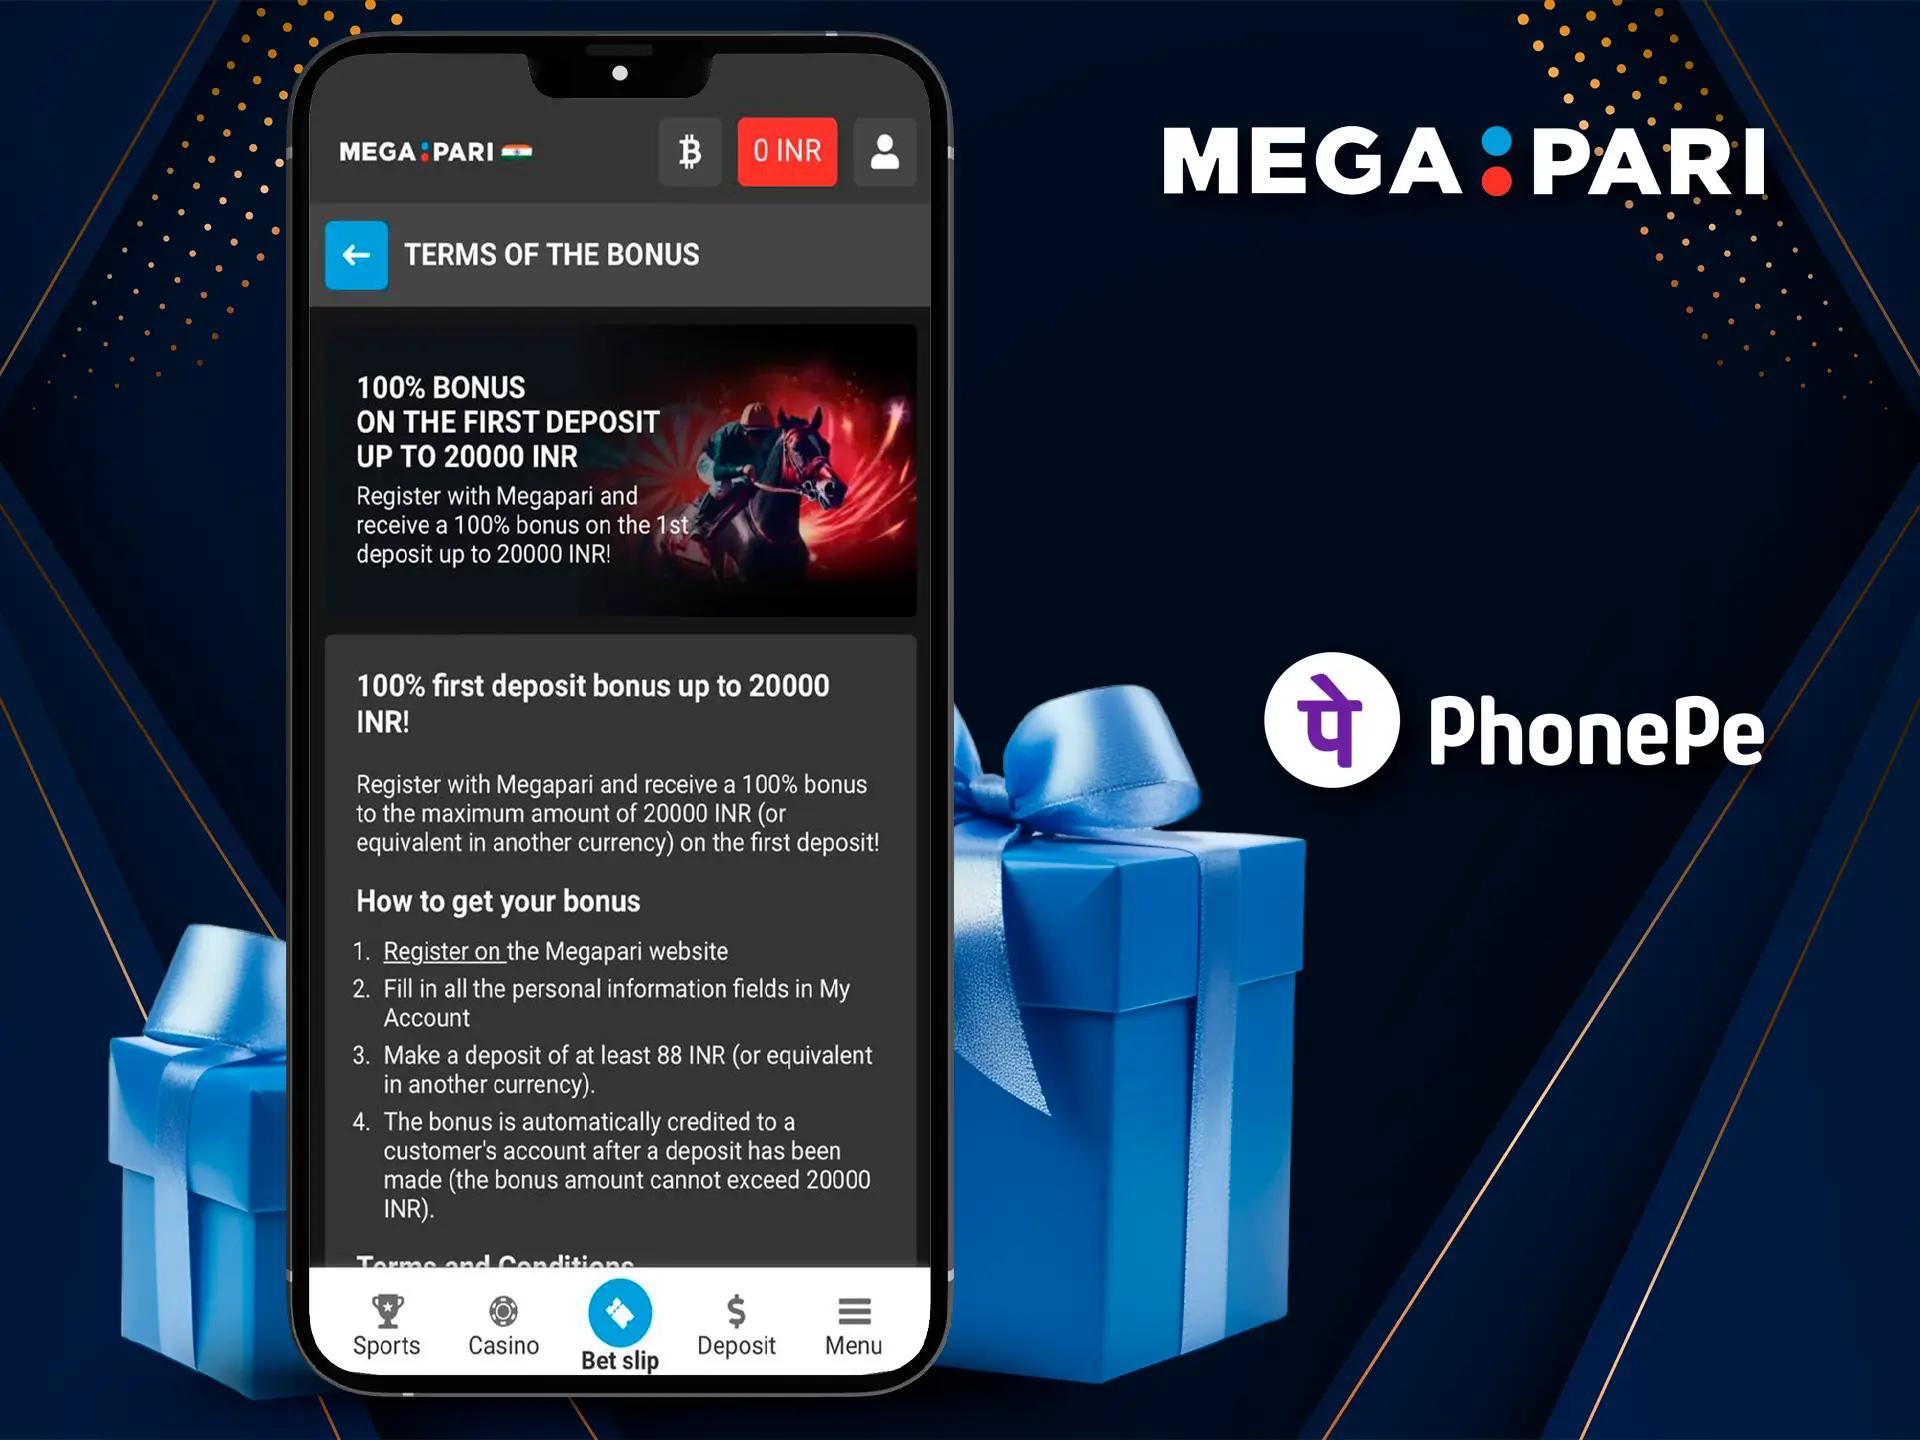 Use Megapari bonuses and top up your account using PhonePe payment system.